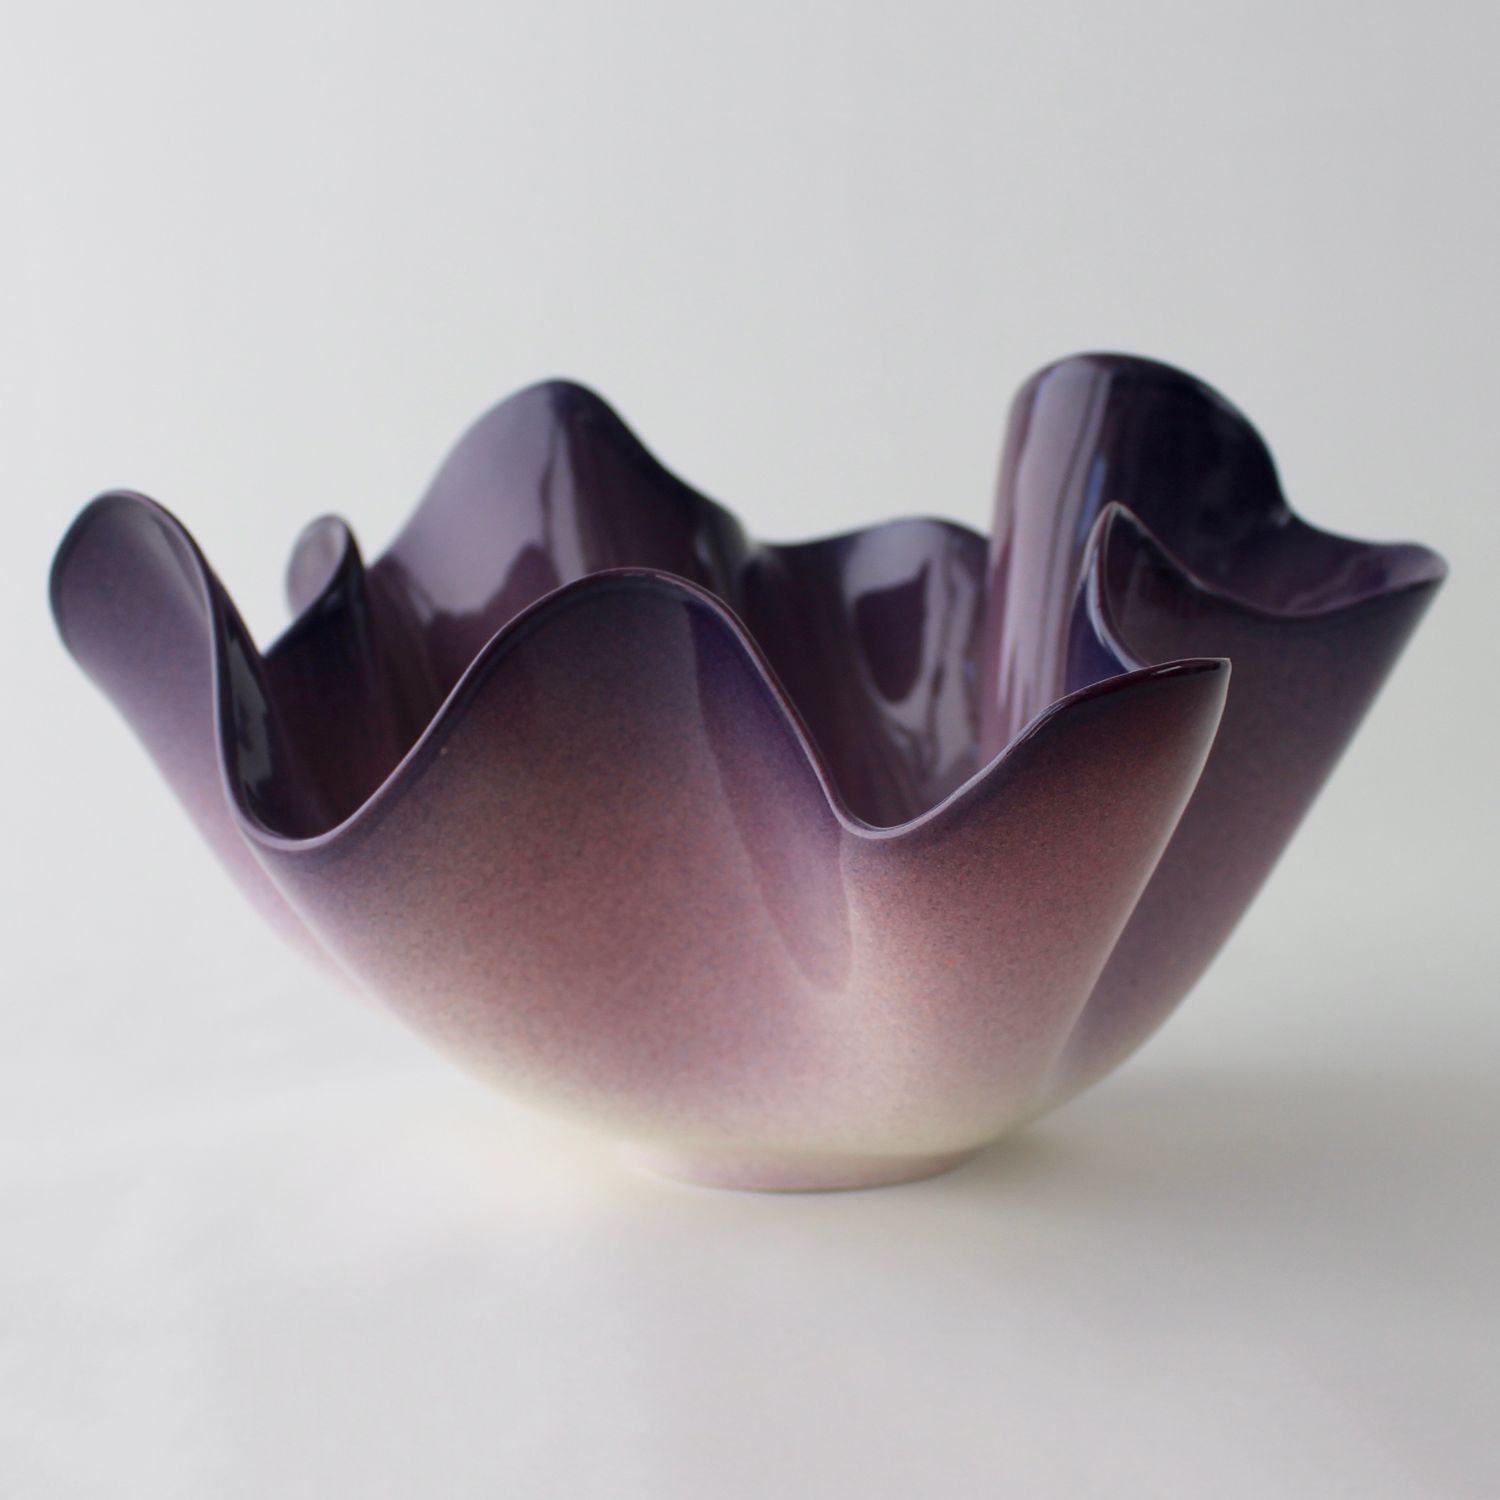 Annika Hoefs: Blooming Bowl – Violet Product Image 1 of 1